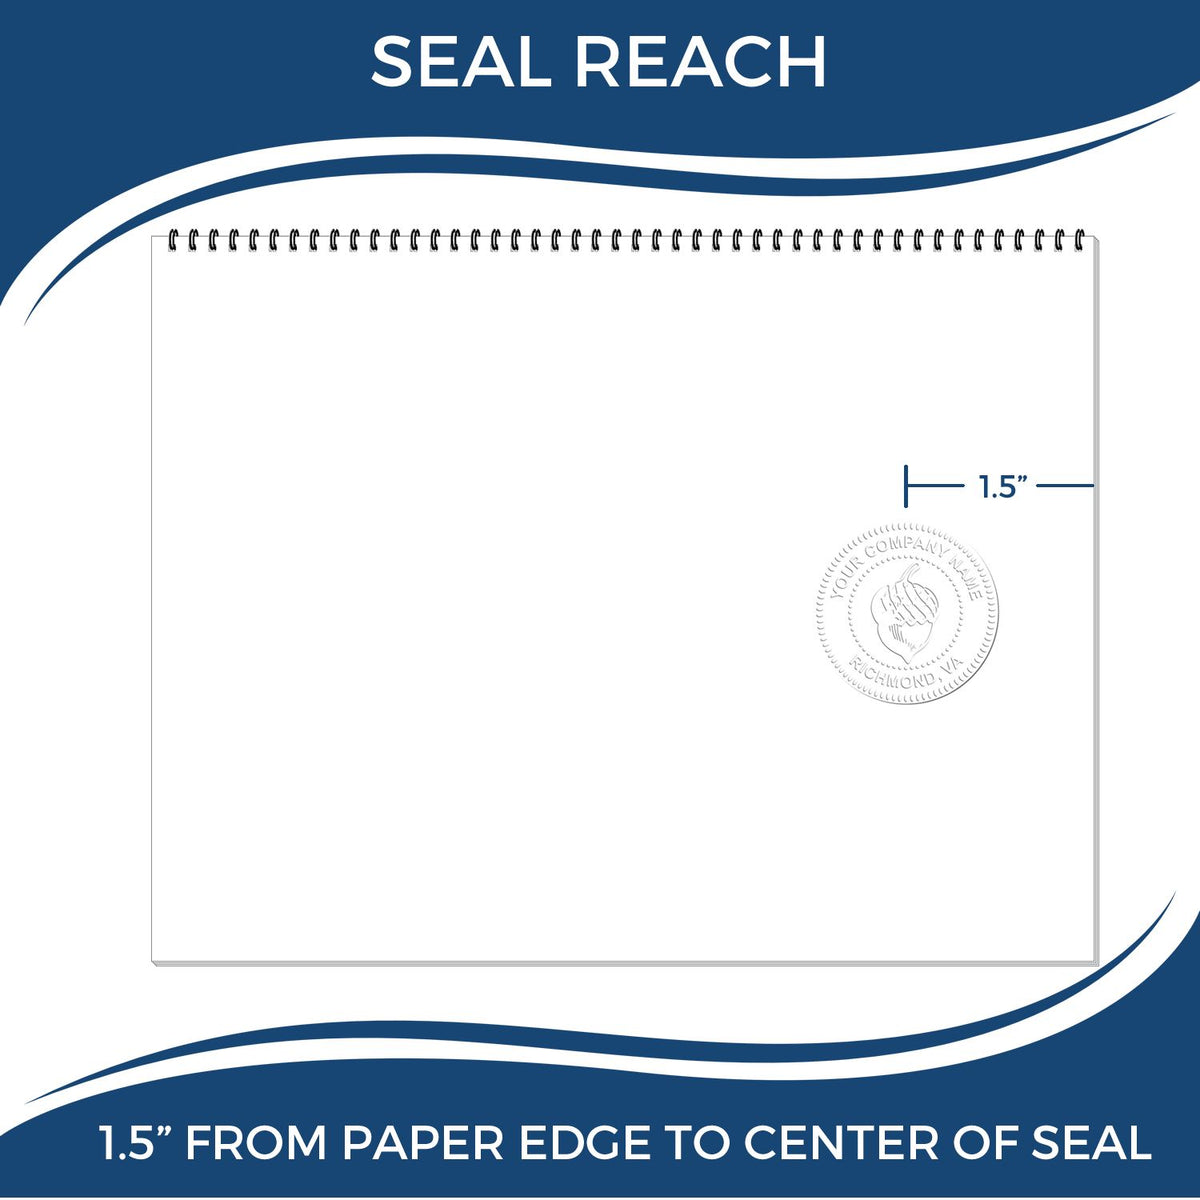 An infographic showing the seal reach which is represented by a ruler and a miniature seal image of the Gift Utah Architect Seal